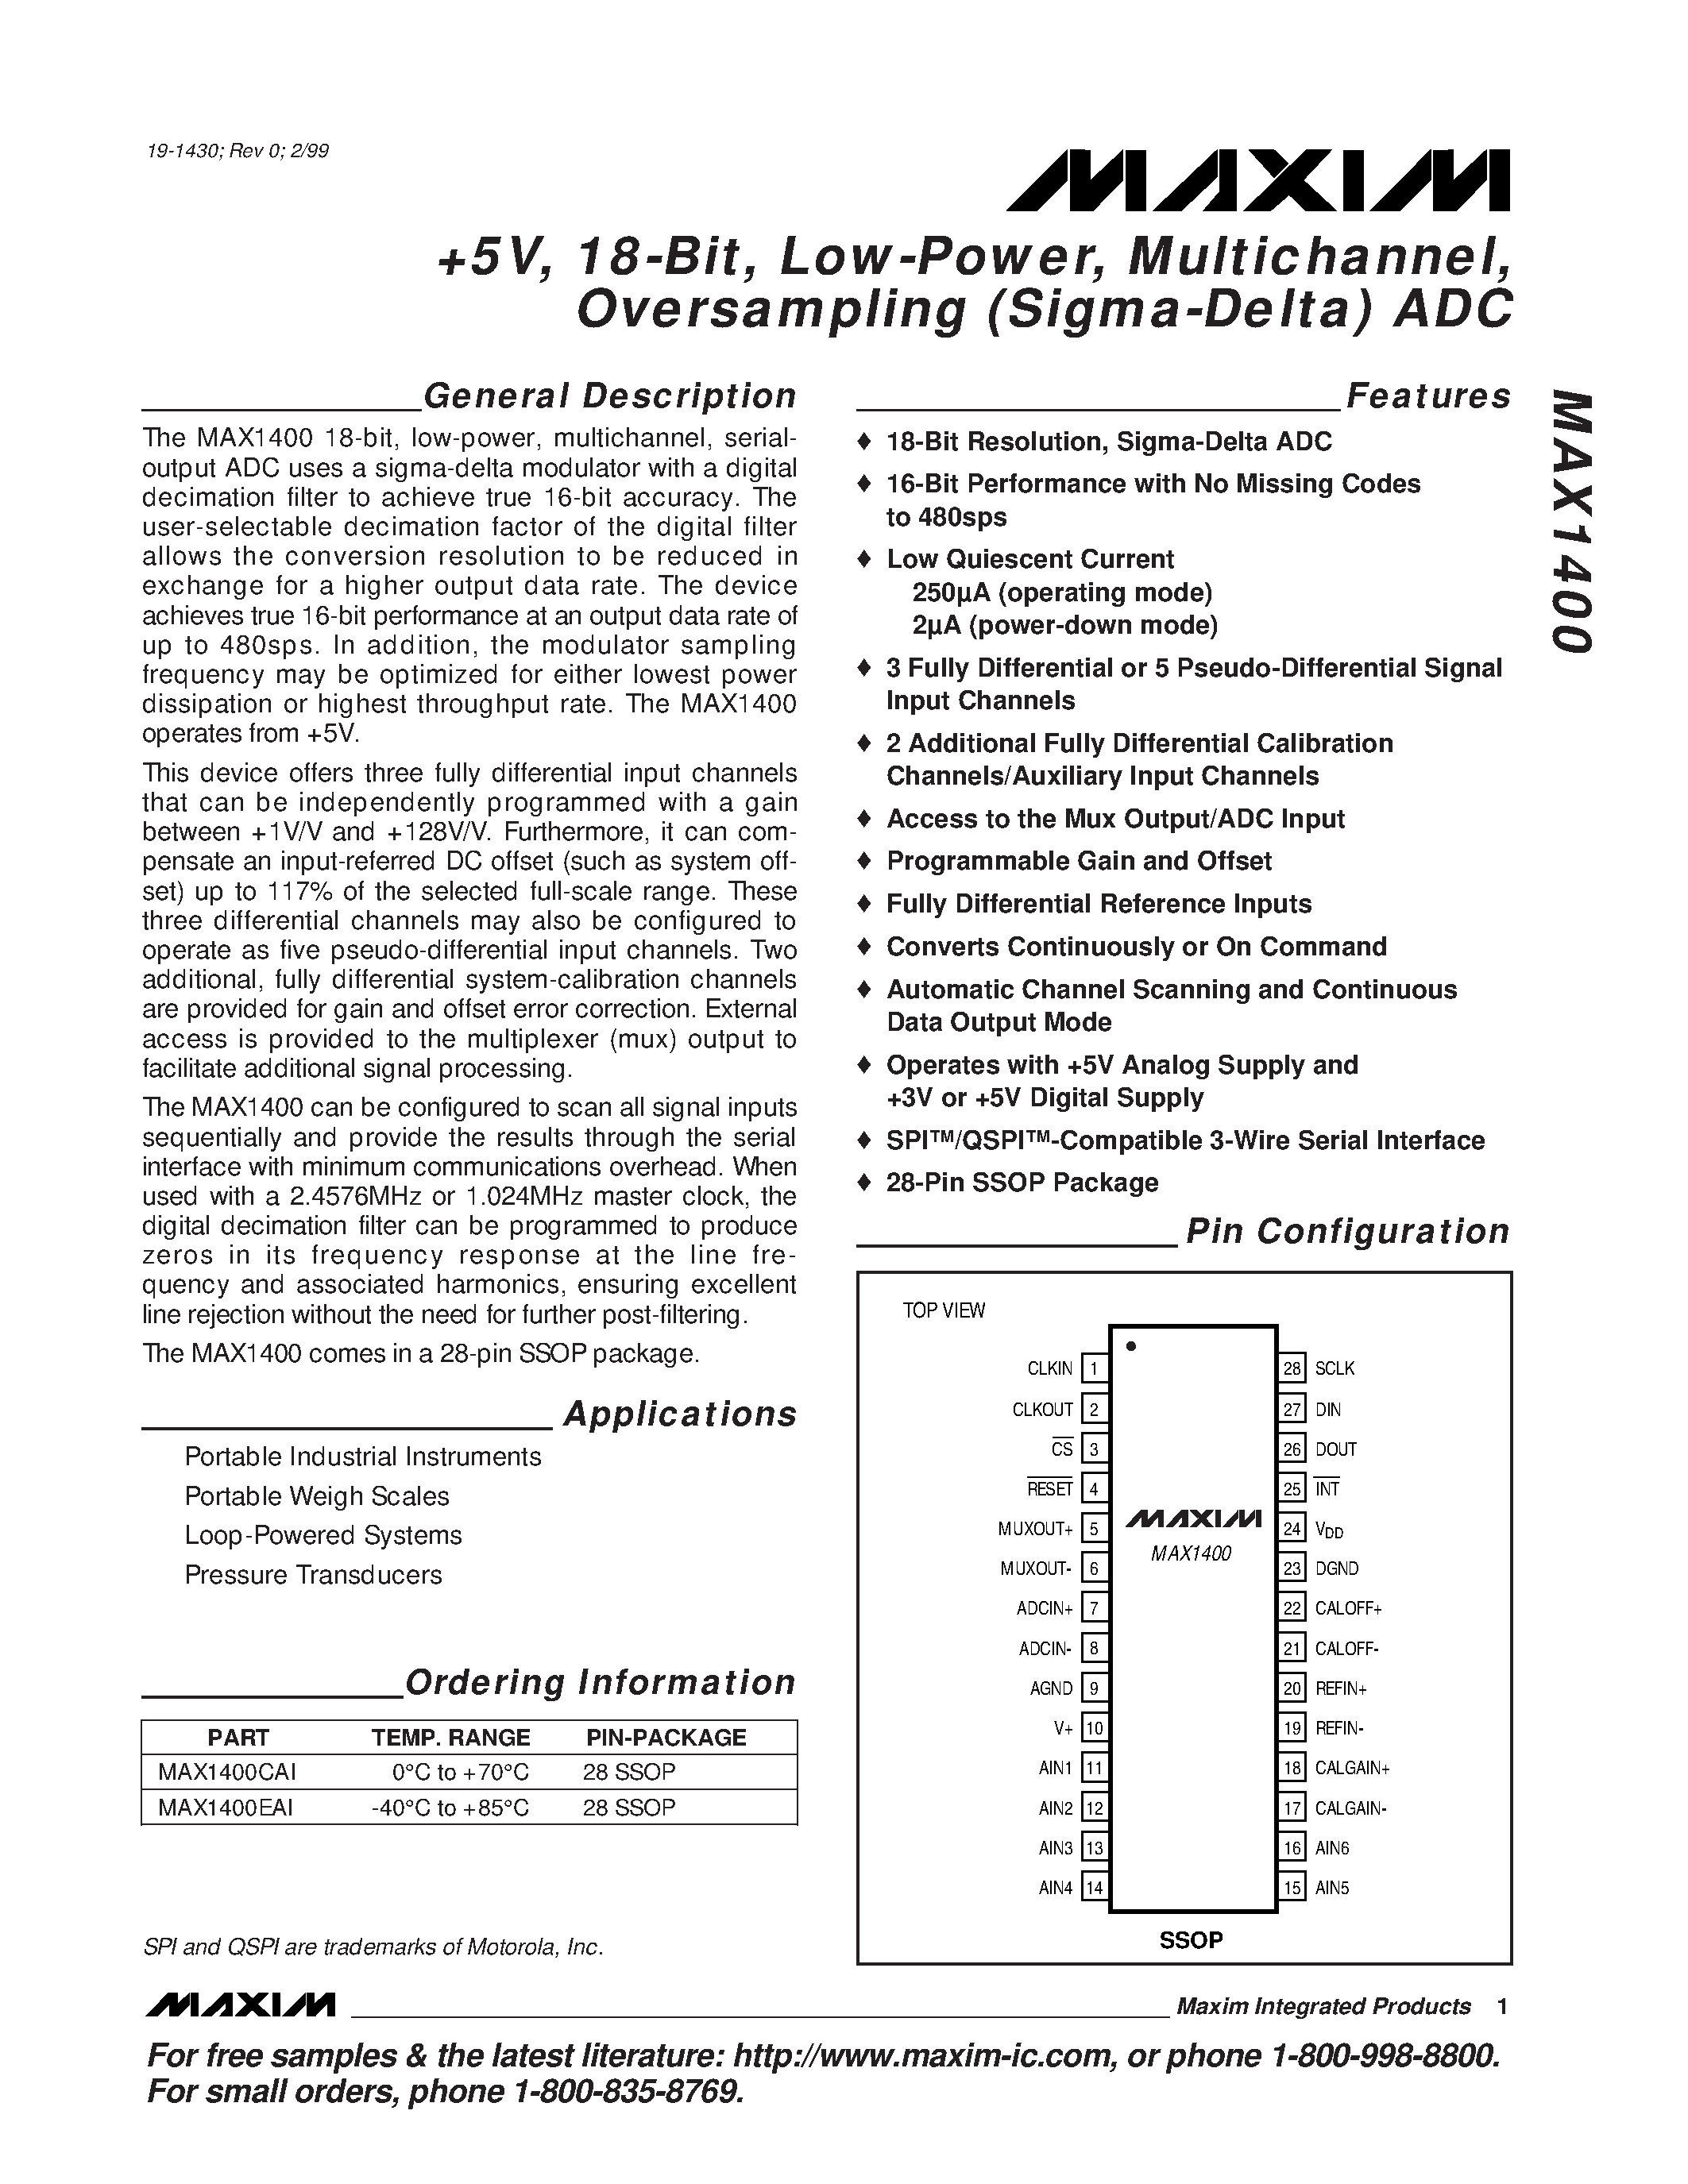 Datasheet MAX1400 - %V / 18-Bit / Low-Power / Multichannel / Oversampling Sigma-Delta ADC page 1